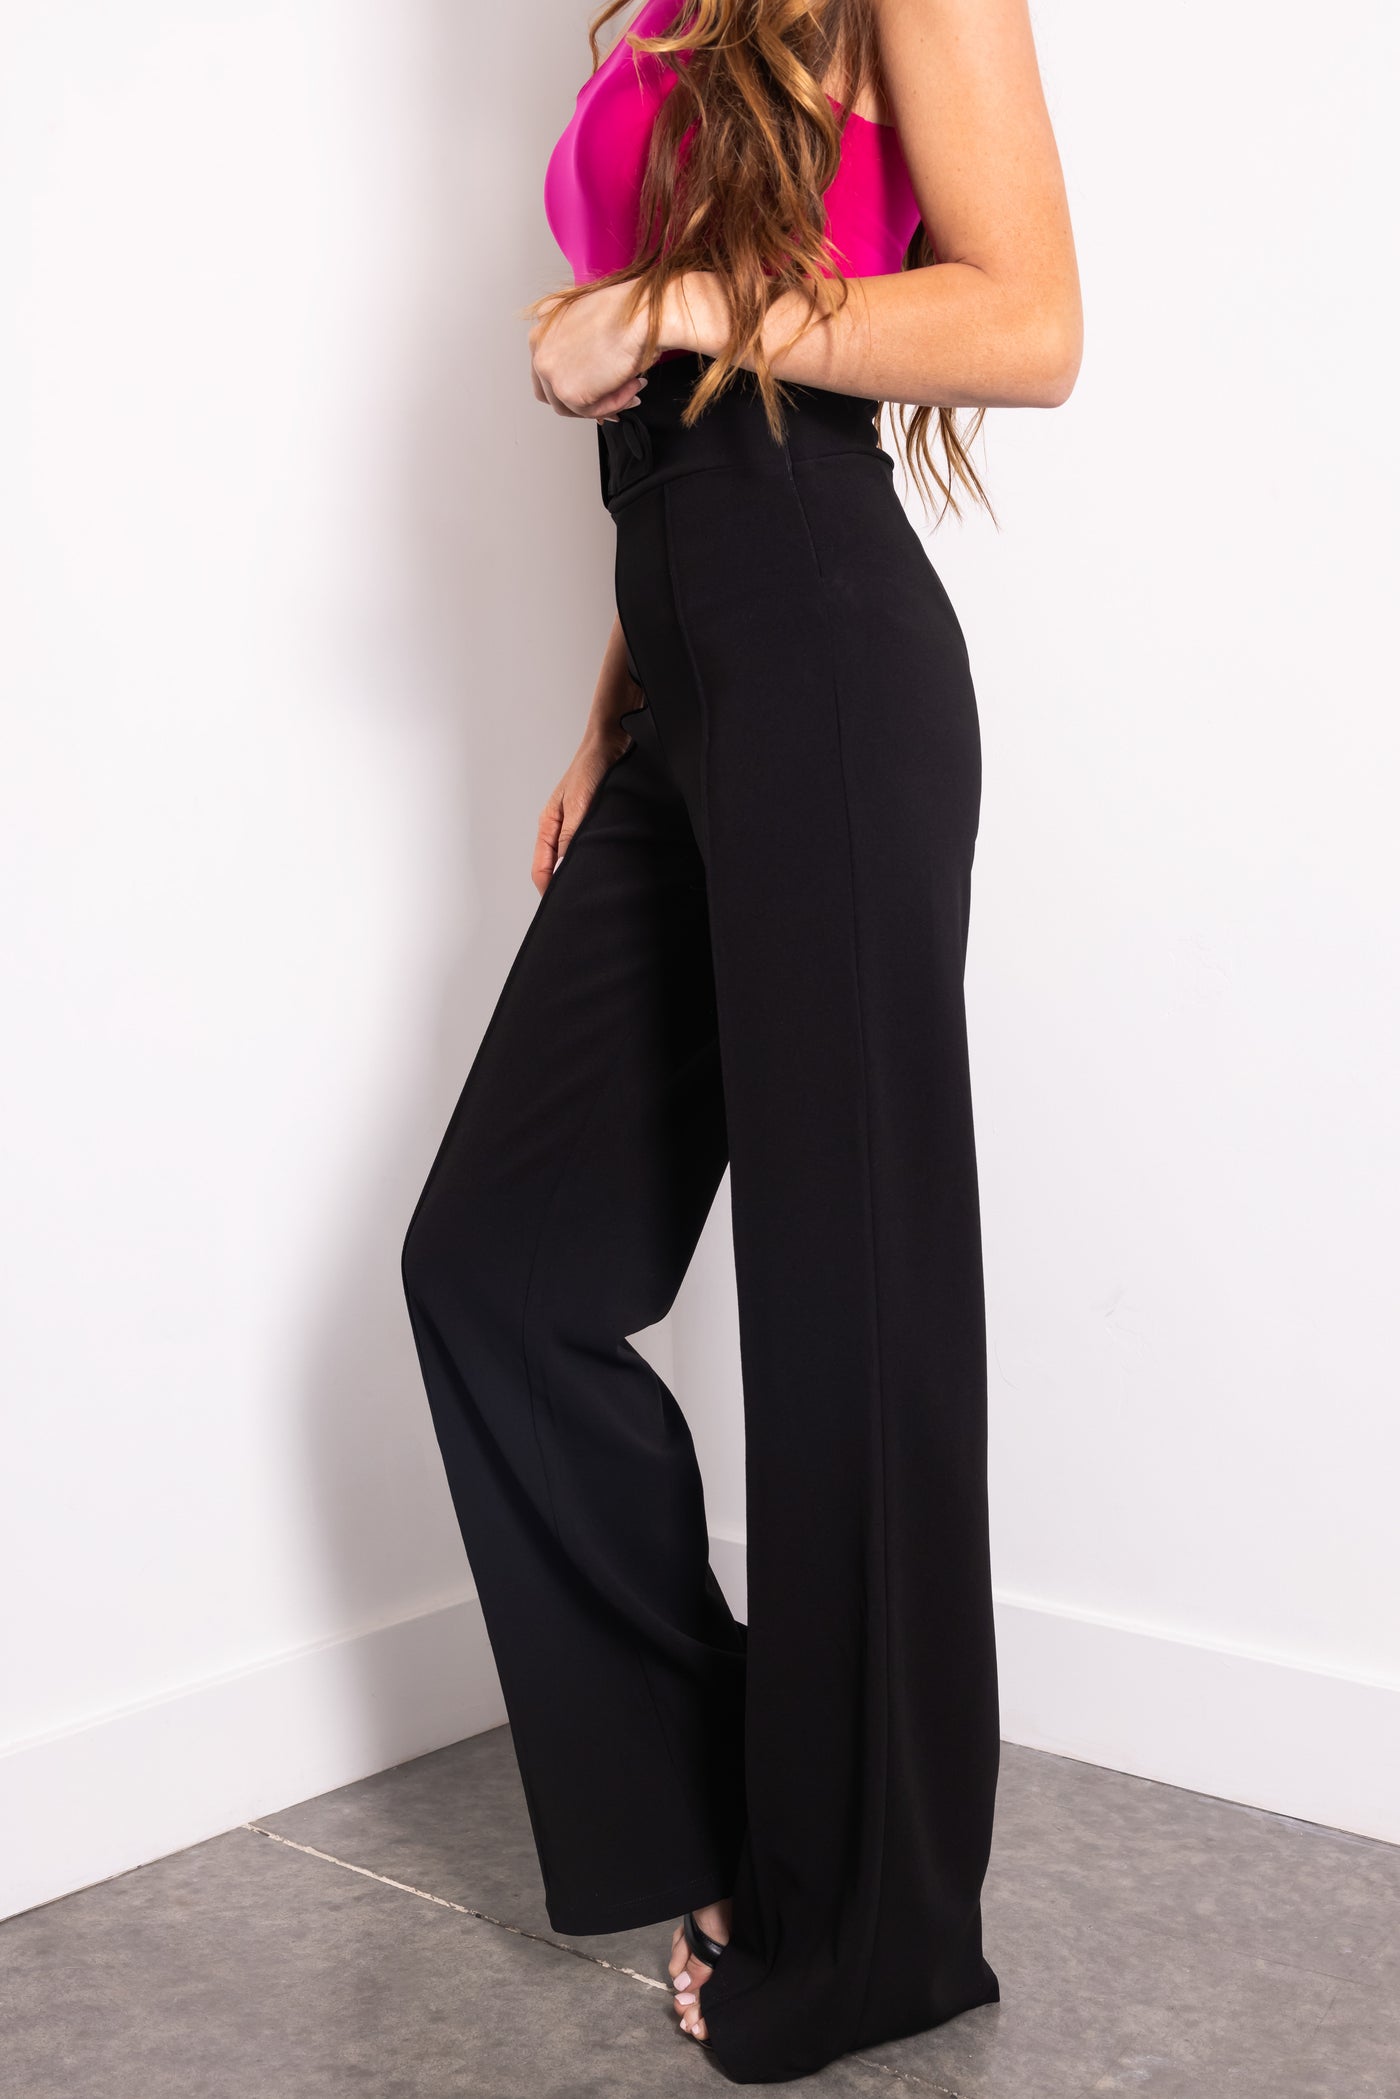 Black Belted High Waist Pleated Pants